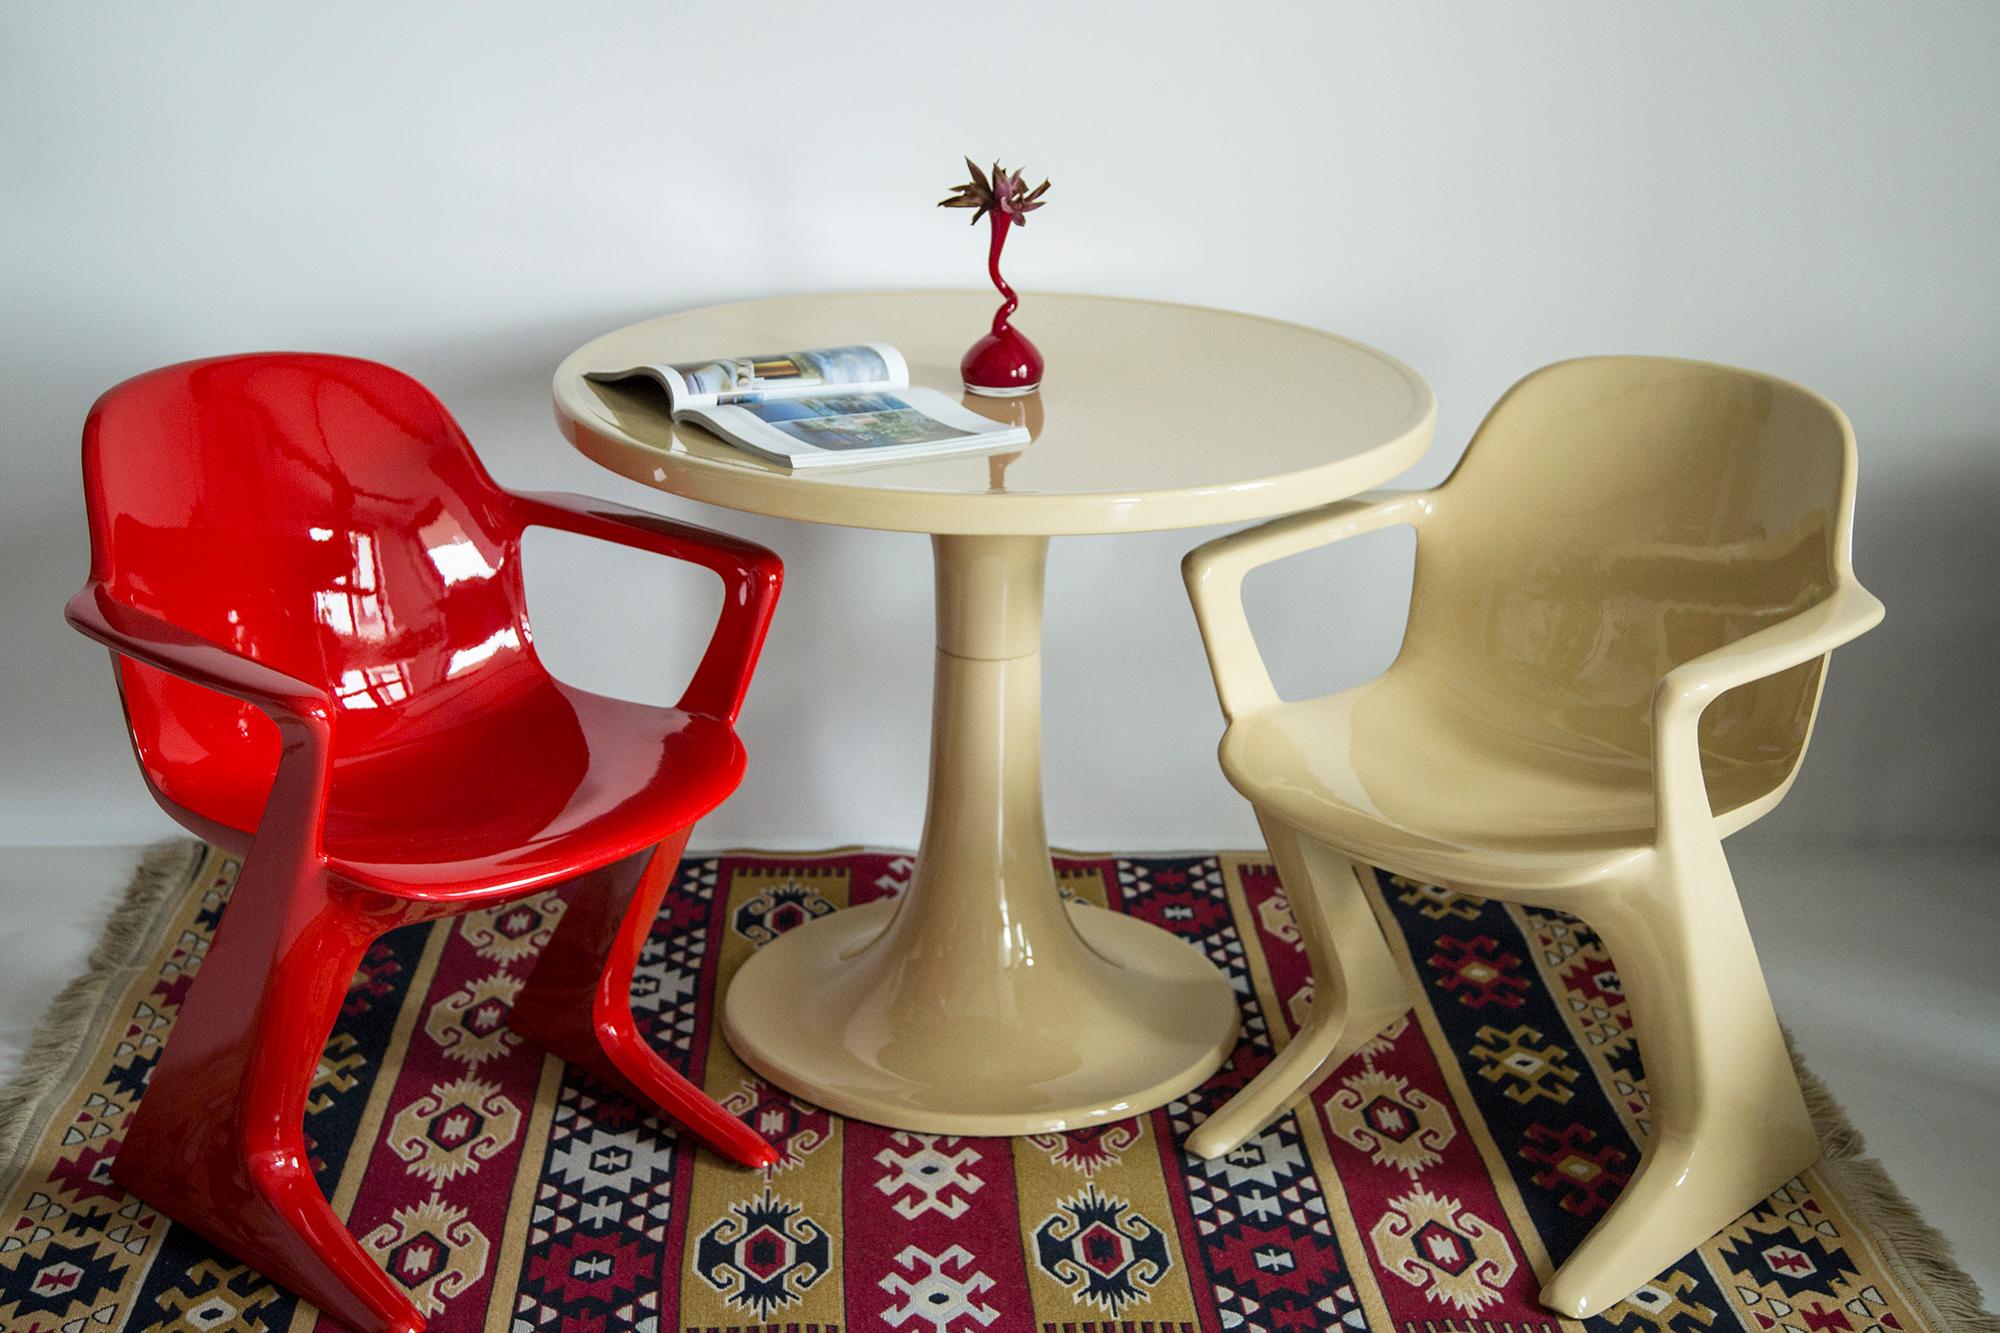 Lacquered Midcentury Beige and Red Kangaroo Chairs and Table Ernst Moeckl, Germany, 1968 For Sale